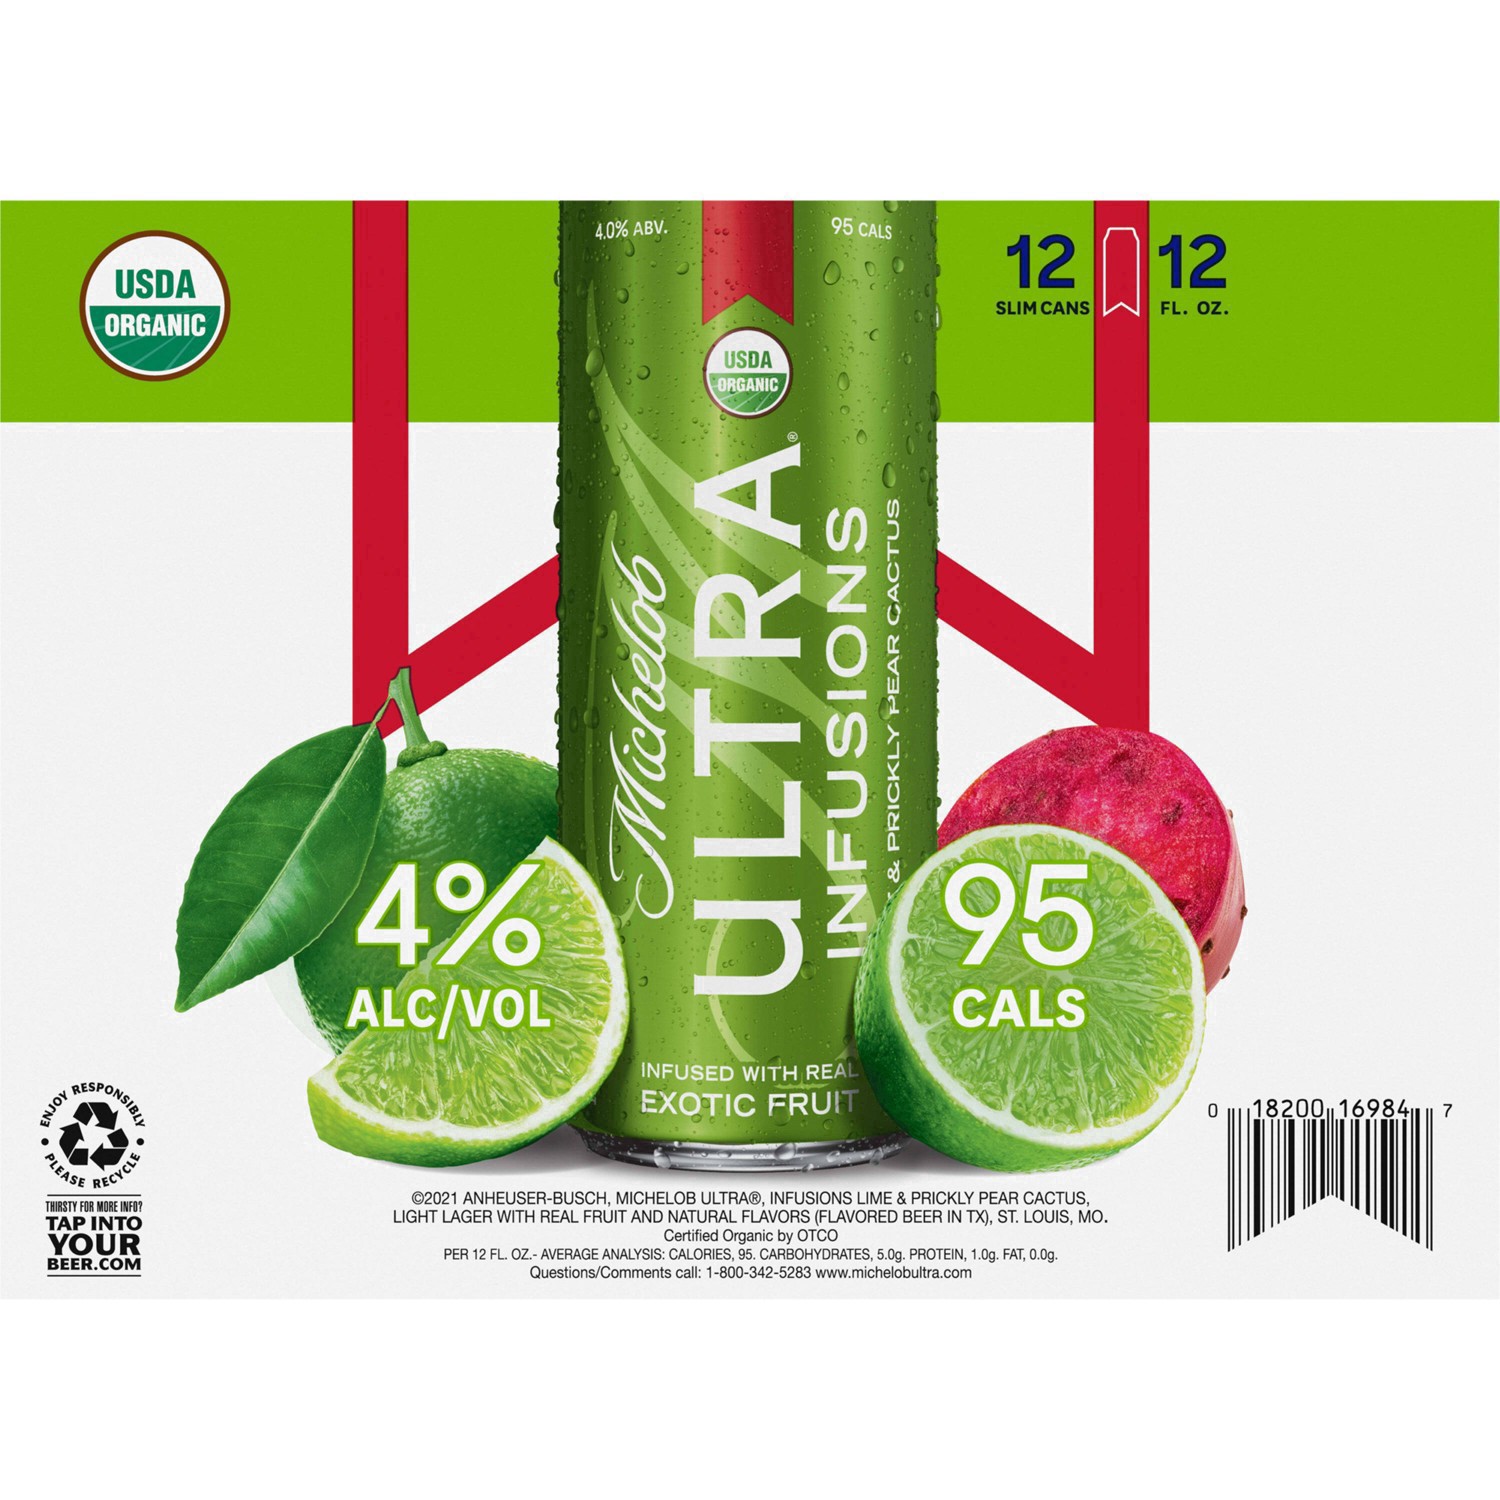 slide 95 of 99, Michelob Ultra Infusions Lime & Prickly Pear Cactus Light Beer, 4% ABV, 12 ct; 12 fl oz